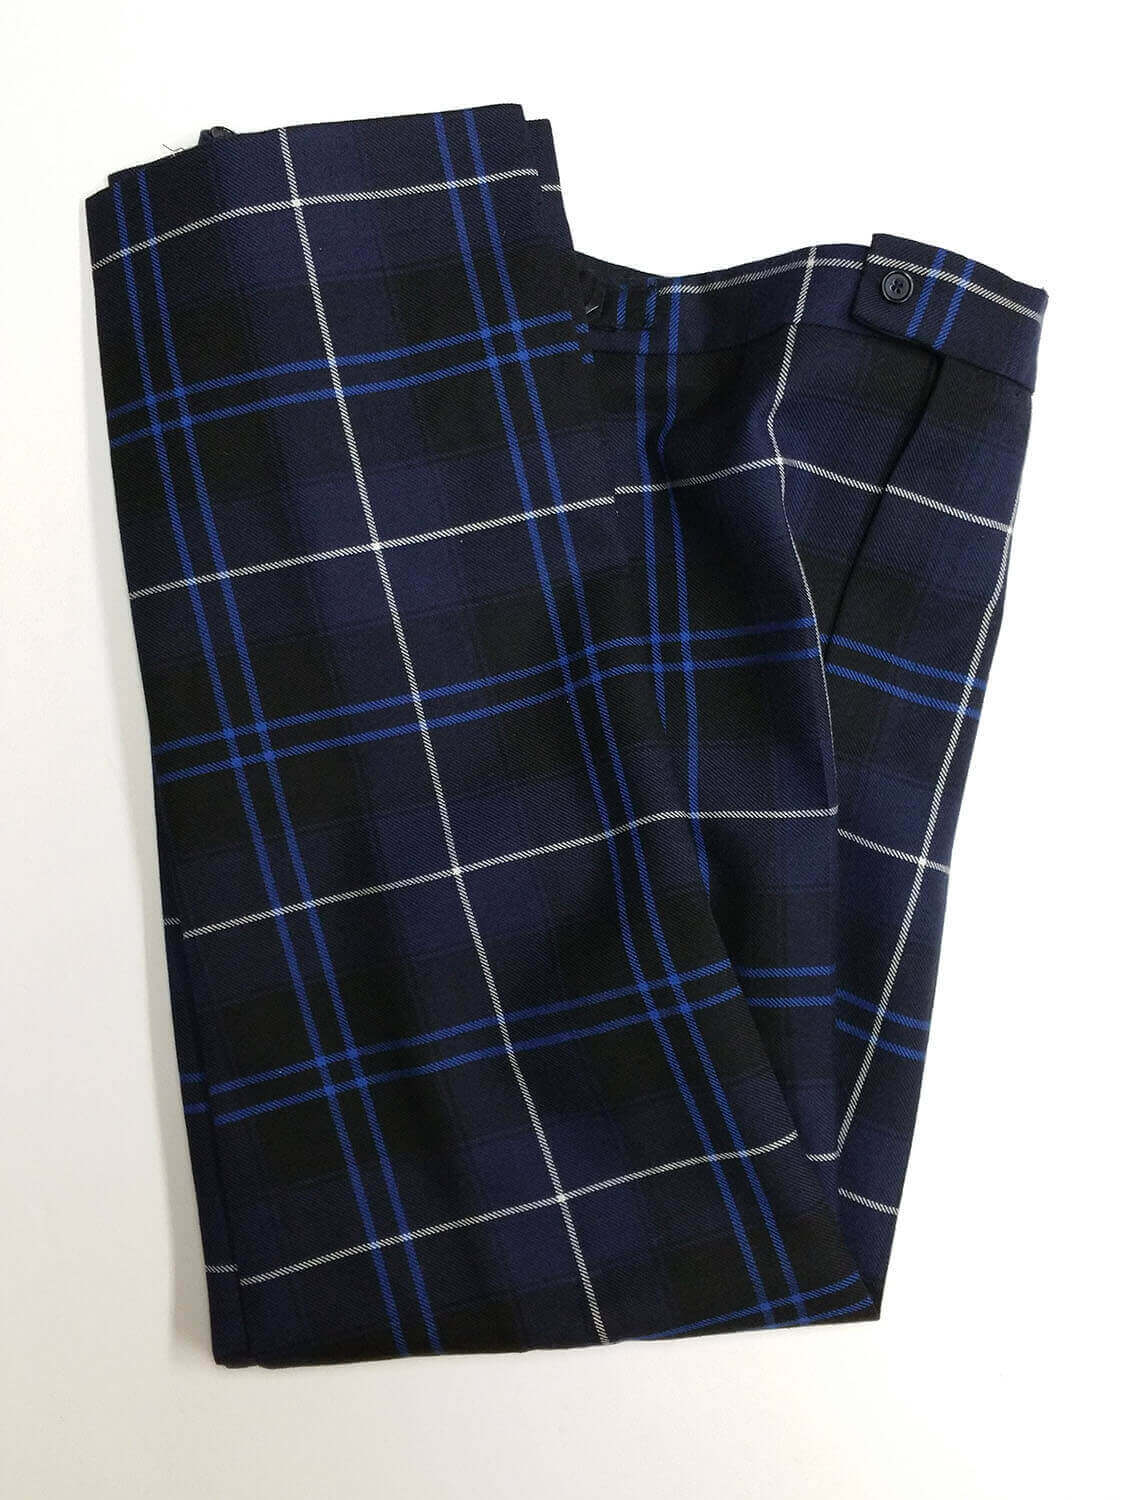 Tartan Trews and trousers folded on a white background from The Celtic Croft.